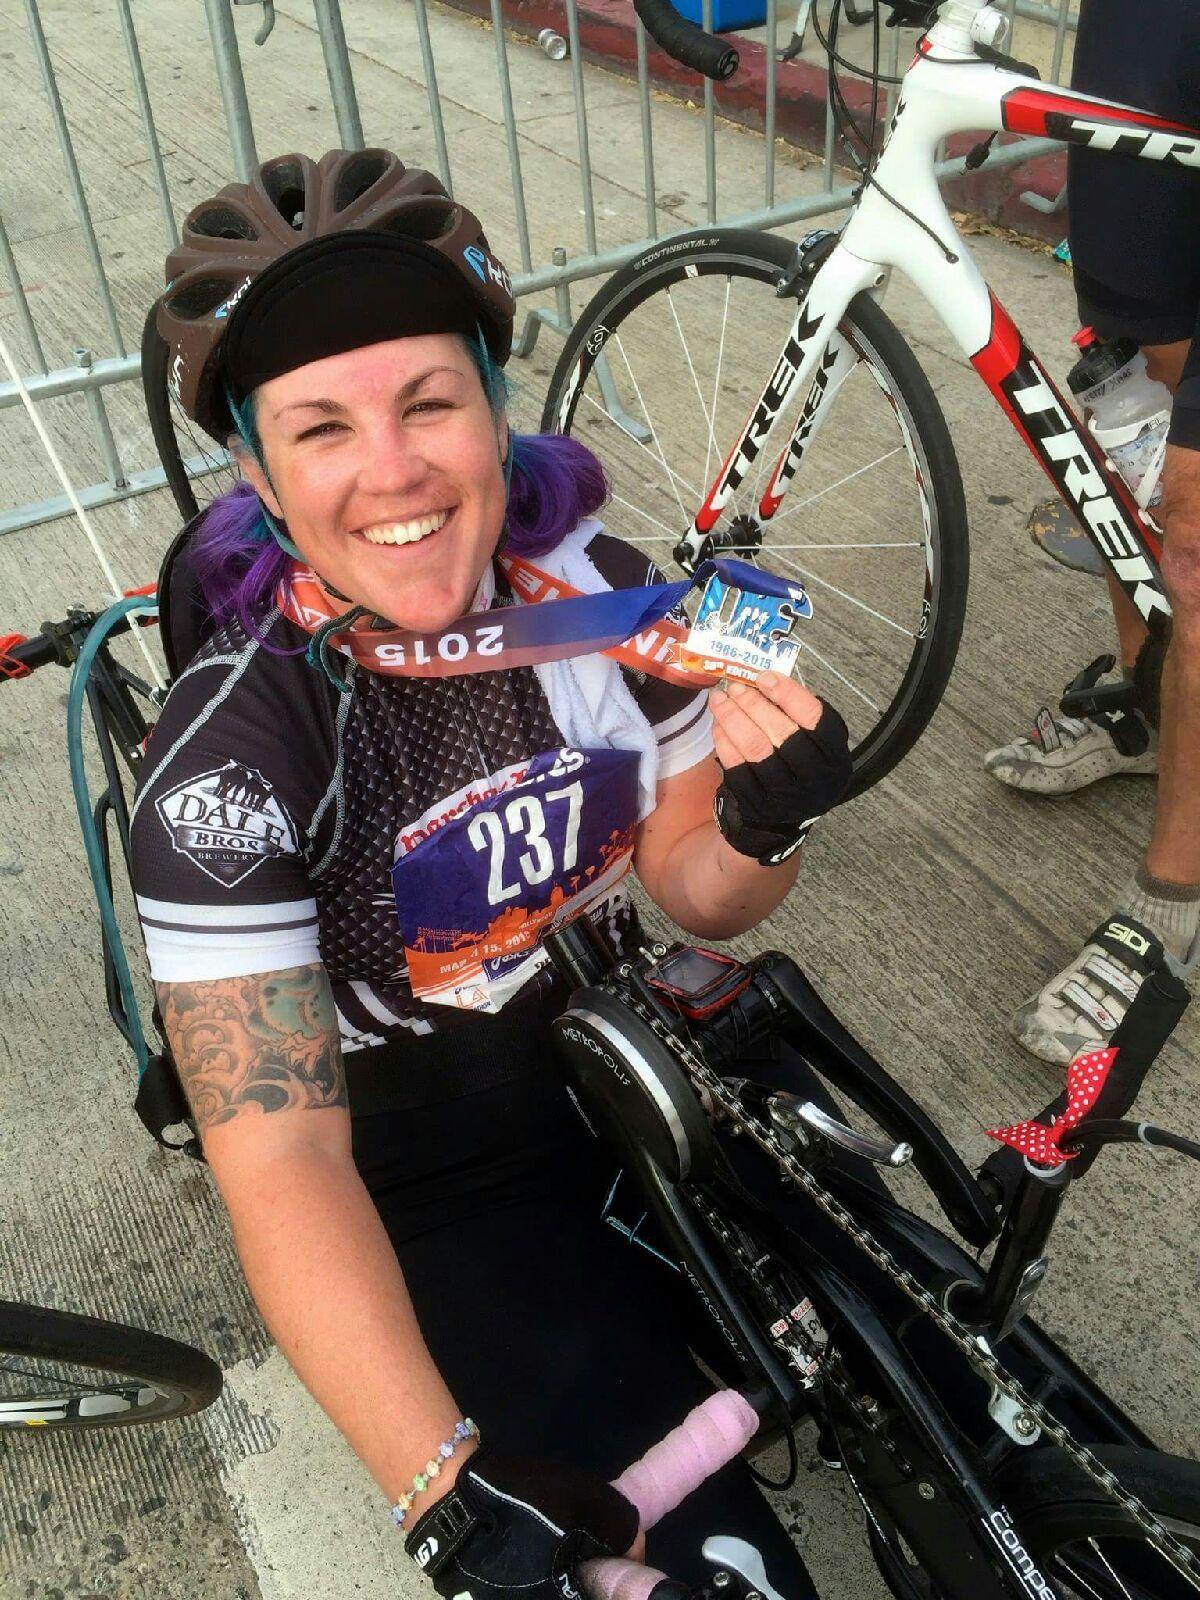 Loma Linda University Health PossAbilities member Jenna Rollman, 28, shows off her first place medal after competing in the 2015 Asics LA Marathon hand cycling race on Sunday, March 15.